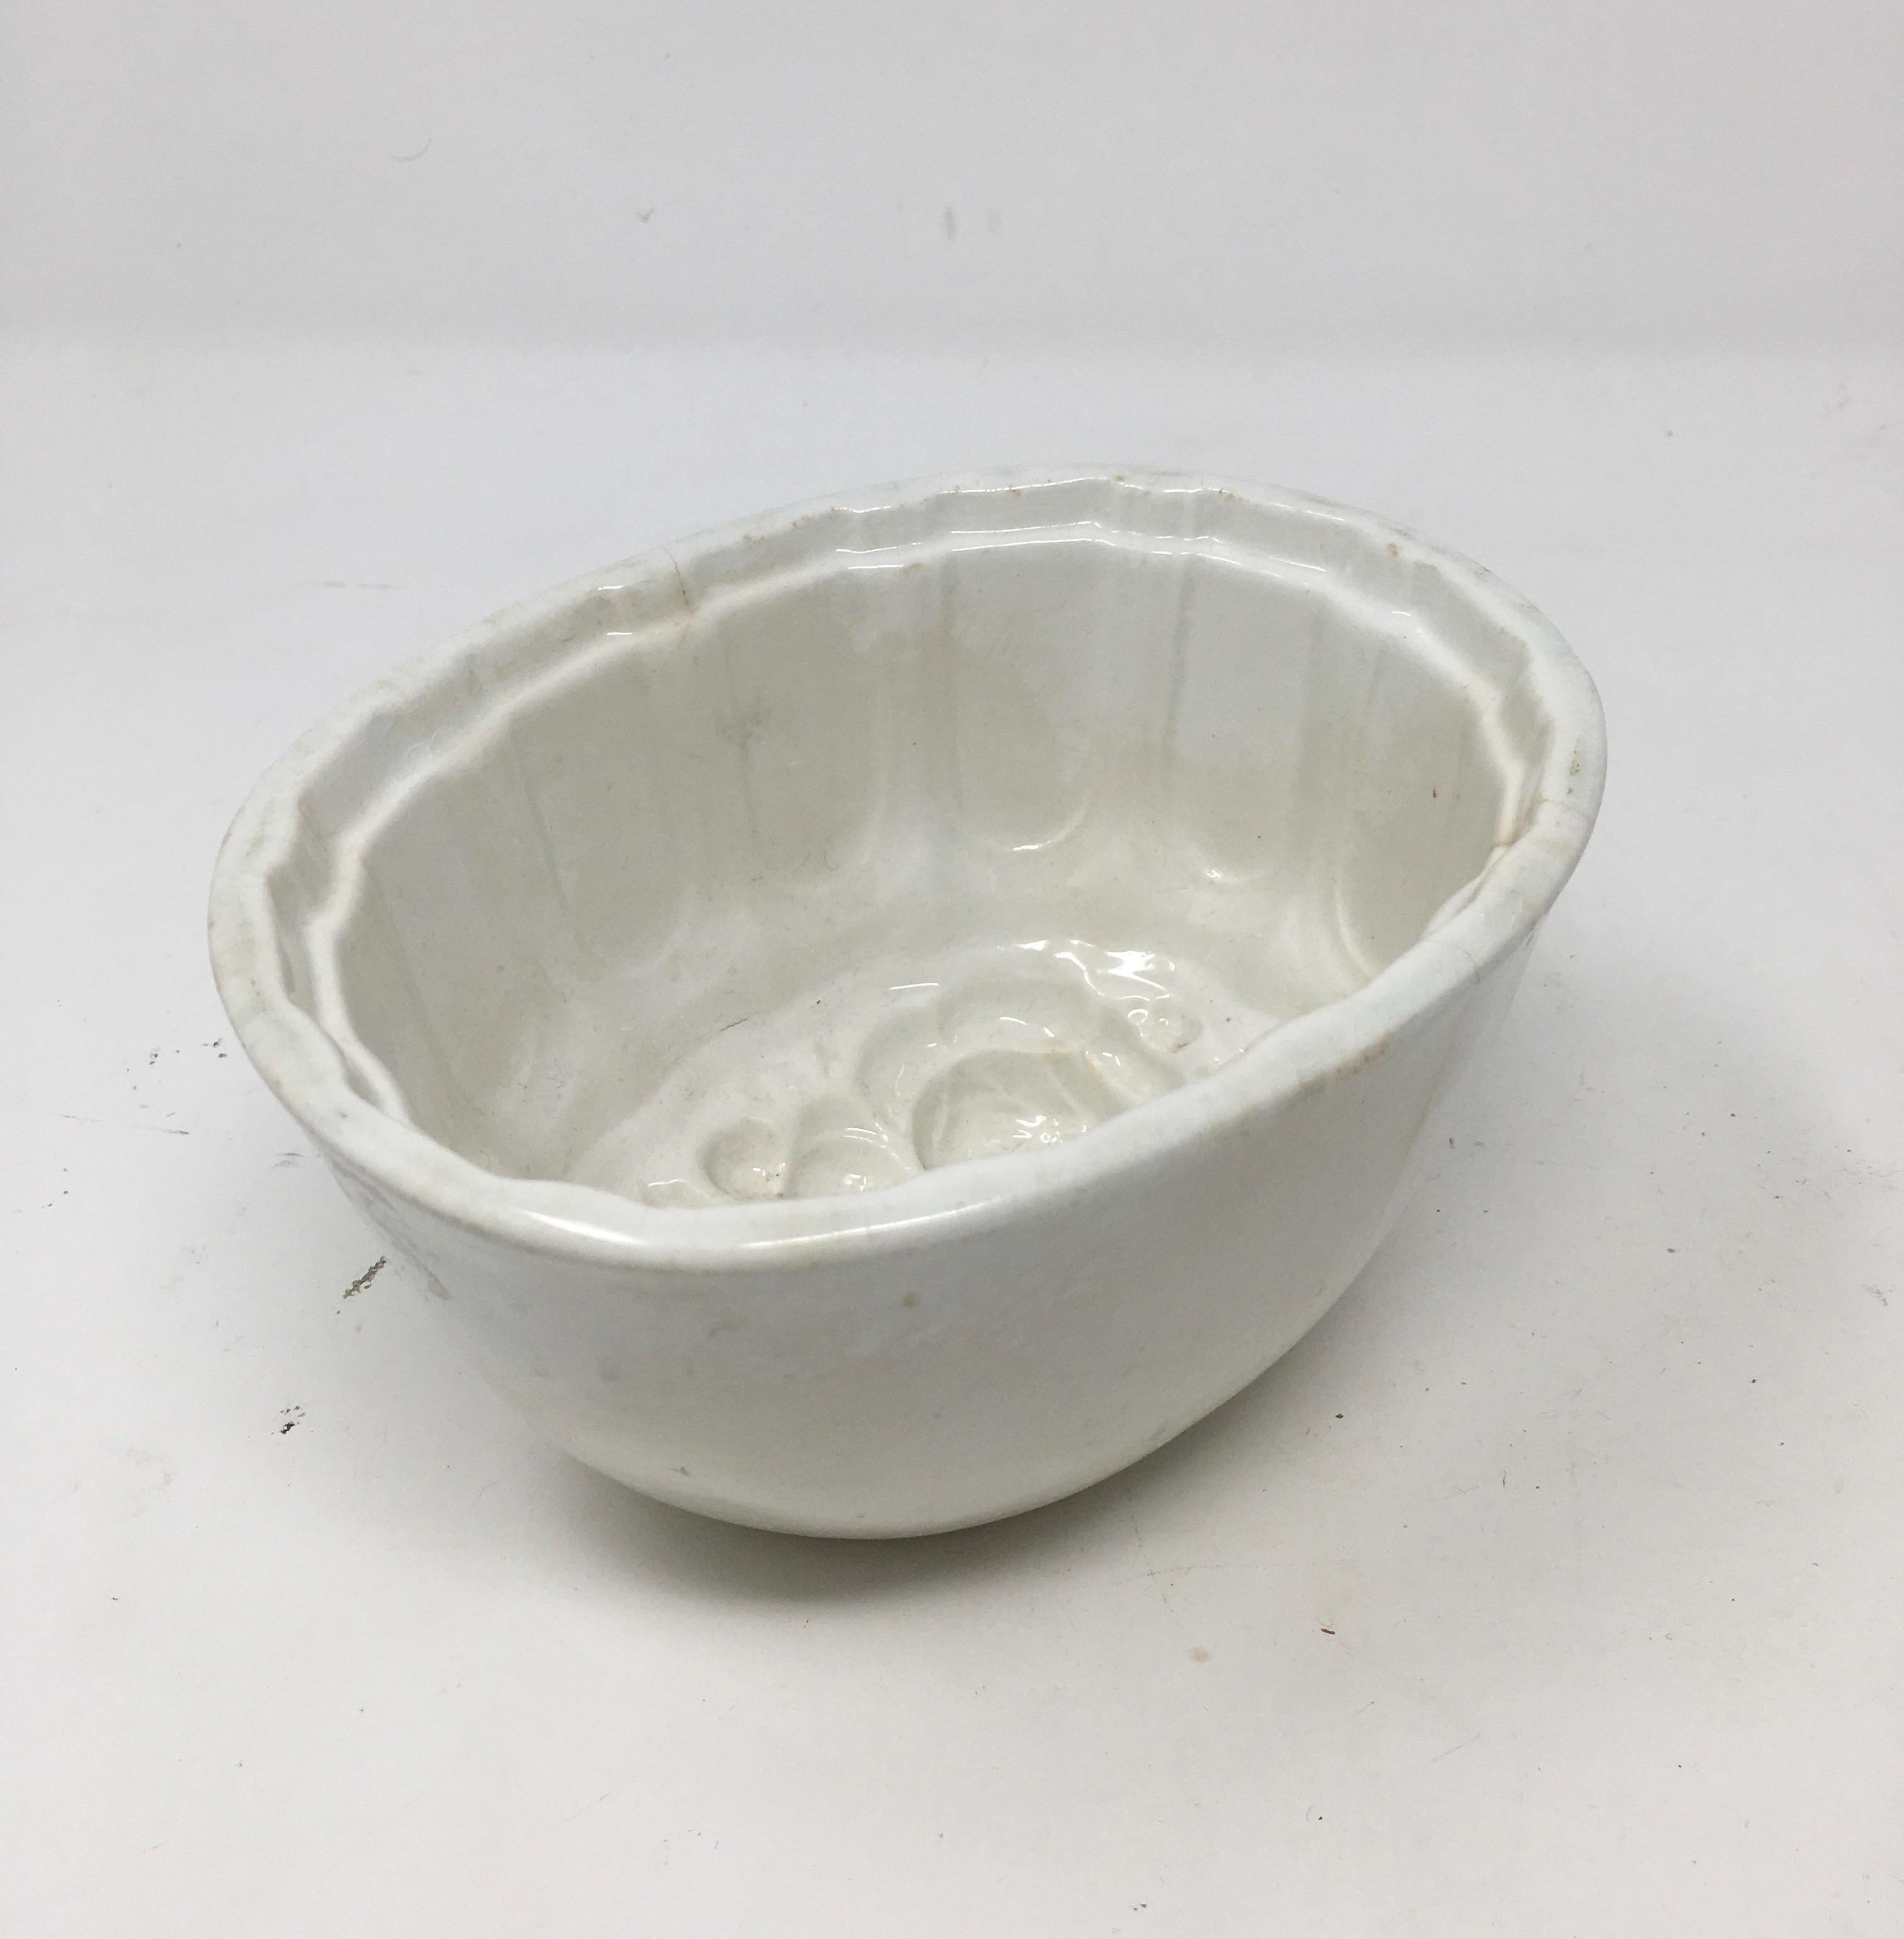 This Victorian Ironstone Mold, with a floral motif was used to mold several different food items such as jellies, aspic, meat and puddings into beautiful shapes served on a platter. The ornate pattern within the bowl would appear on the exterior of